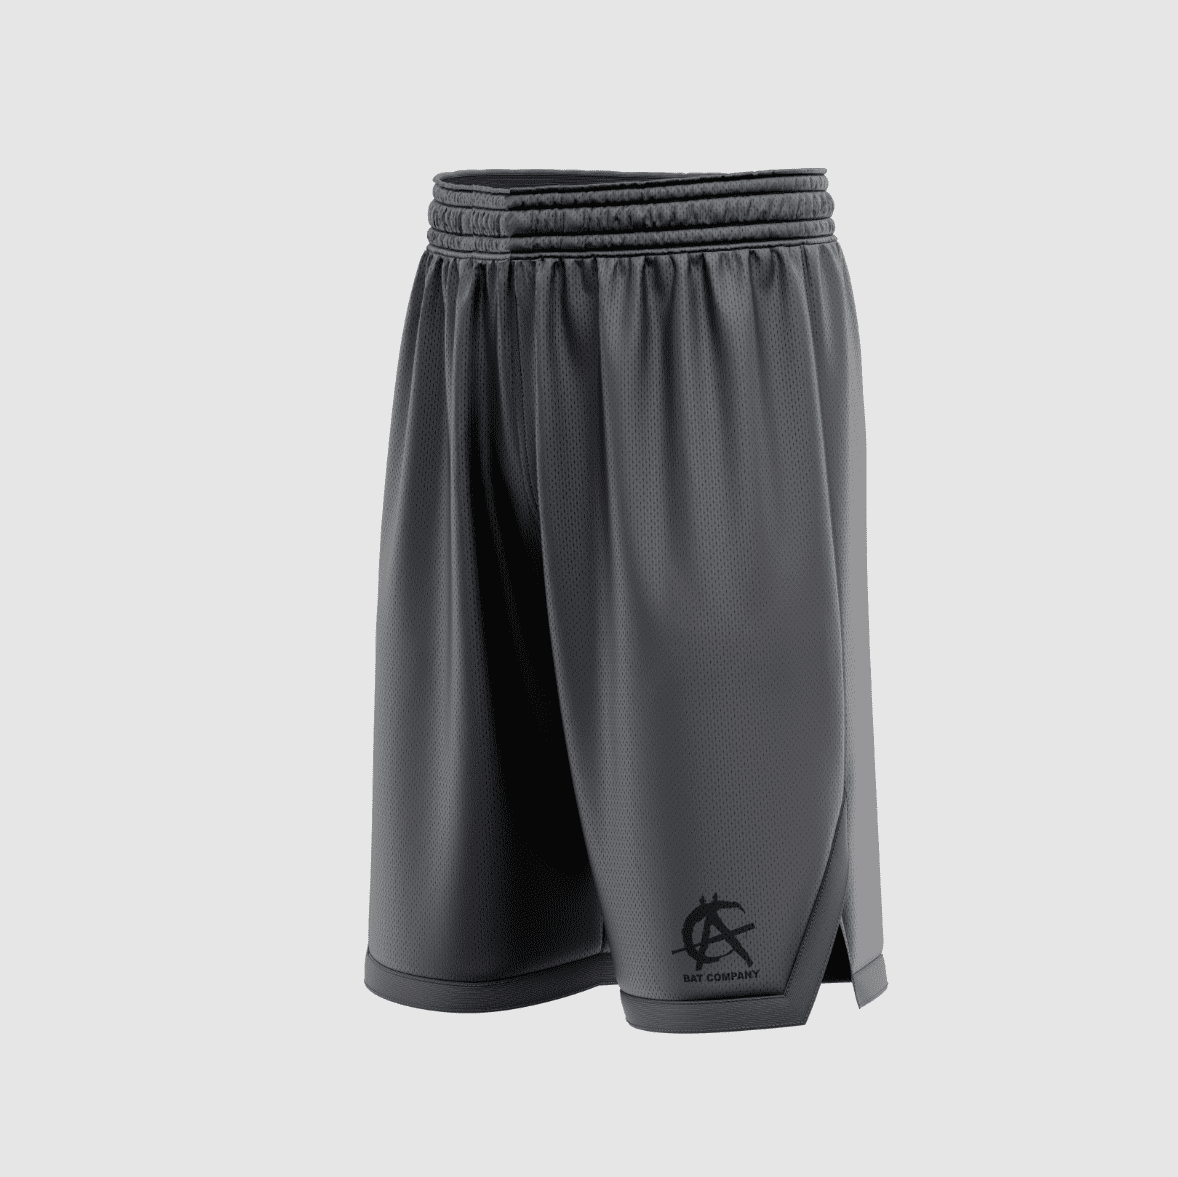 Conquer Vent Max Anarchy Shorts (Charcoal/Black)